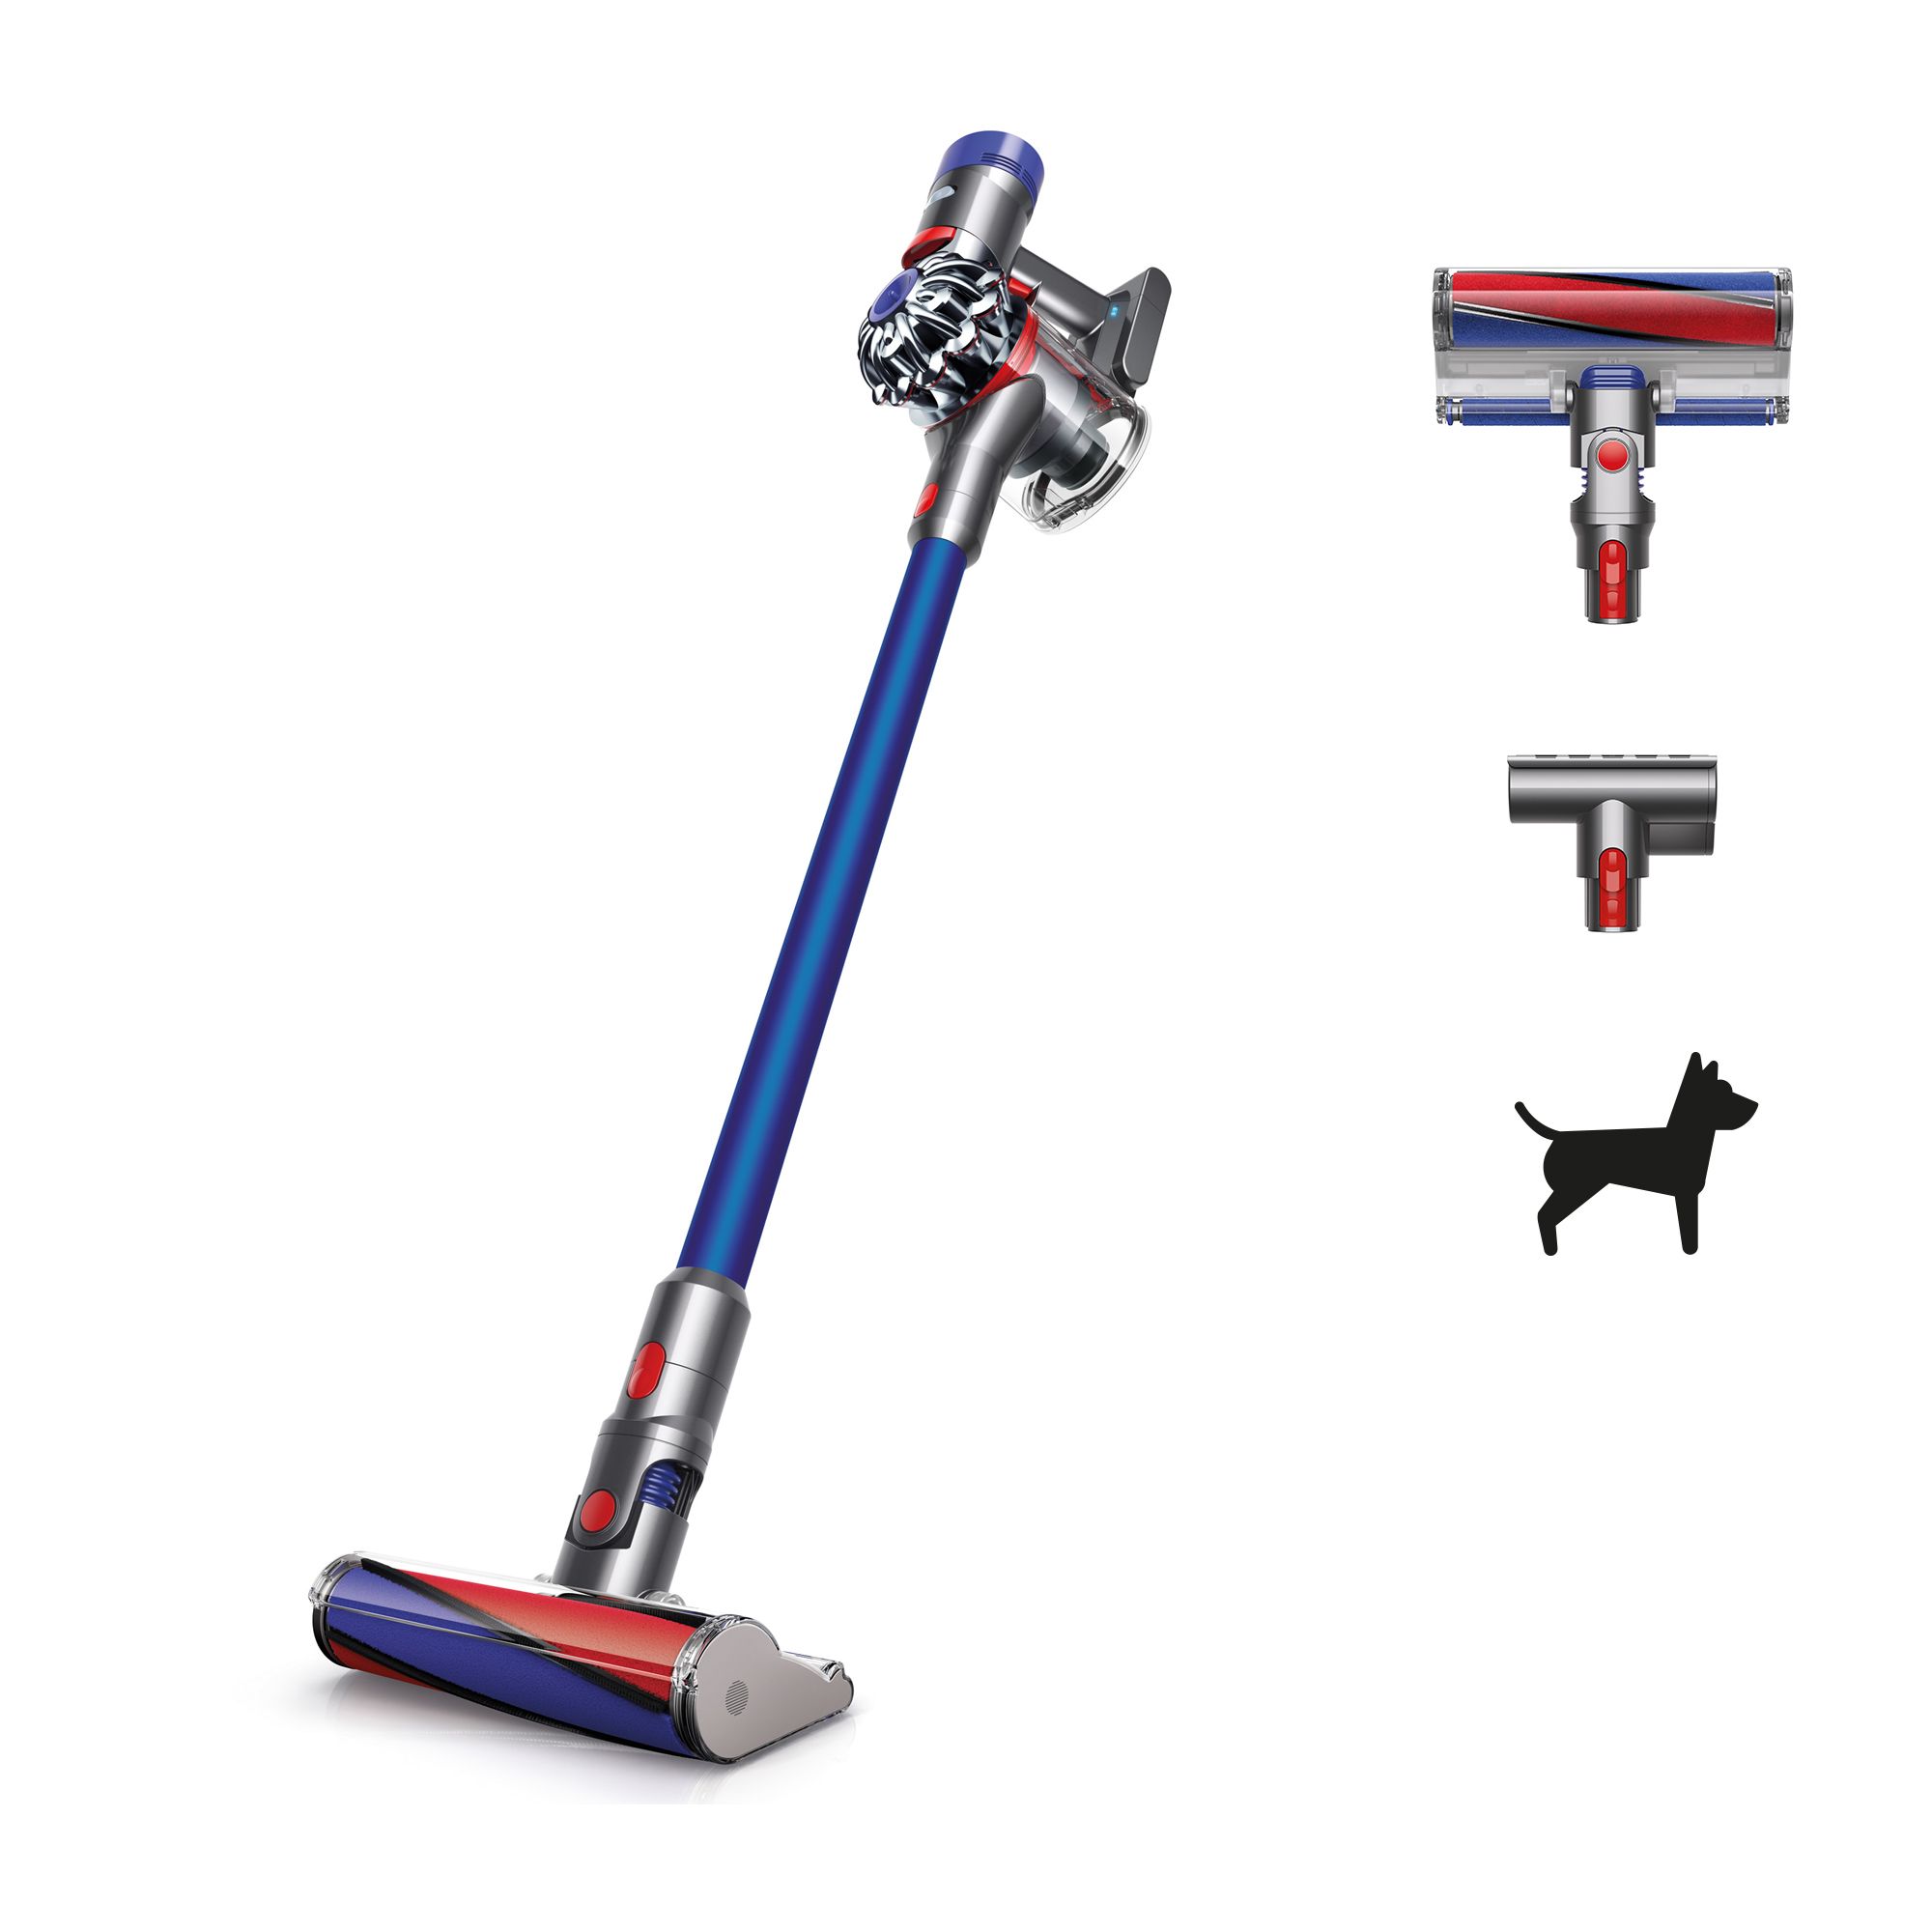 The Best 8 Dyson Vacuums In 2021, Best Dyson Cordless Vacuum For Hardwood Floors